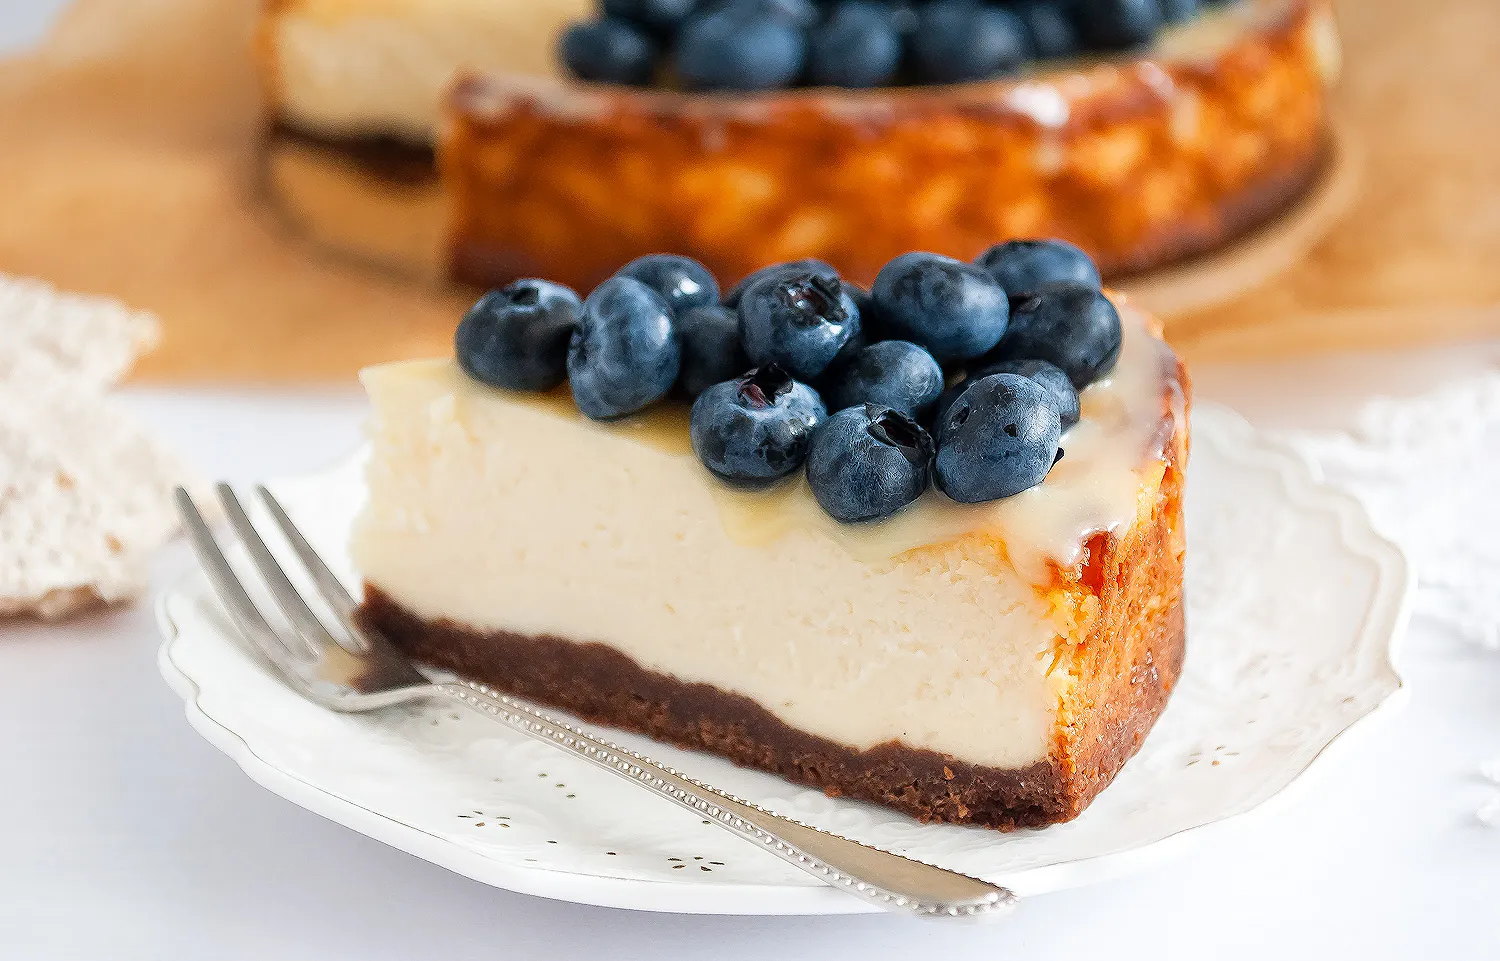 Sernik is a special celebratory dessert in Poland, especially in Christmas. The traditional cheesecake